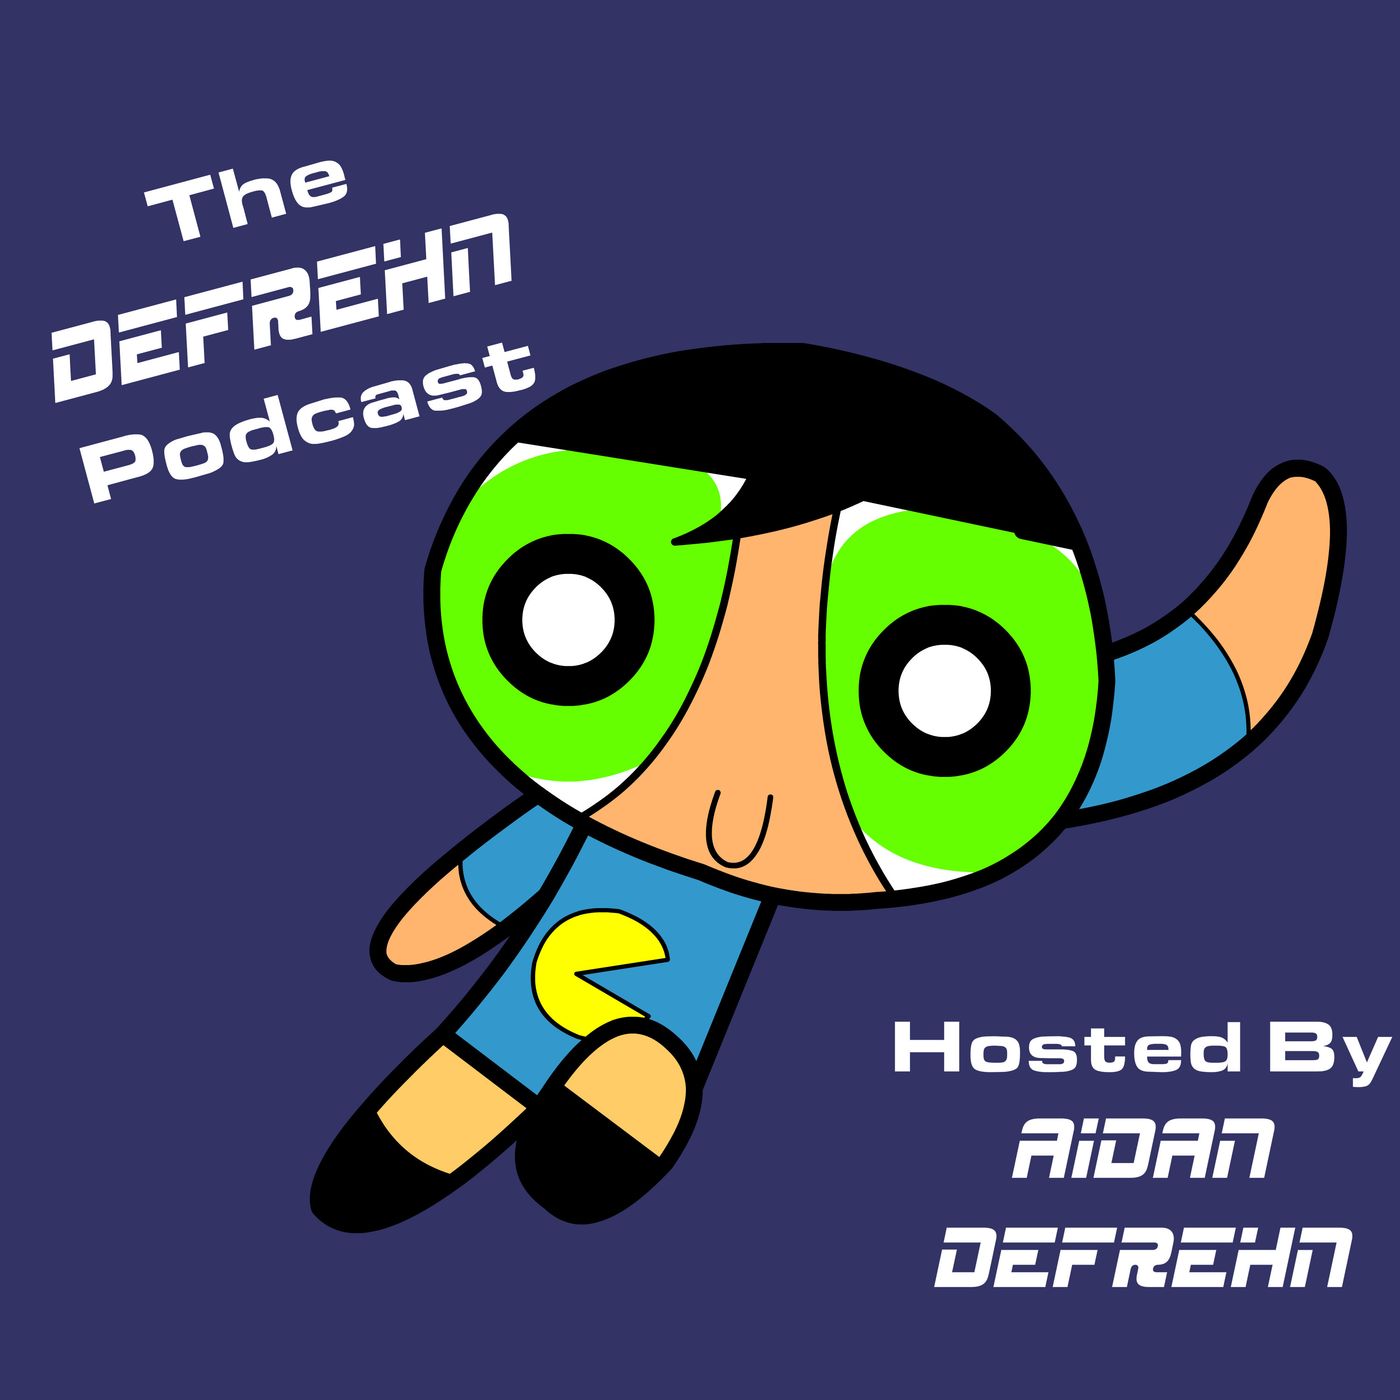 The DeFrehn Podcast